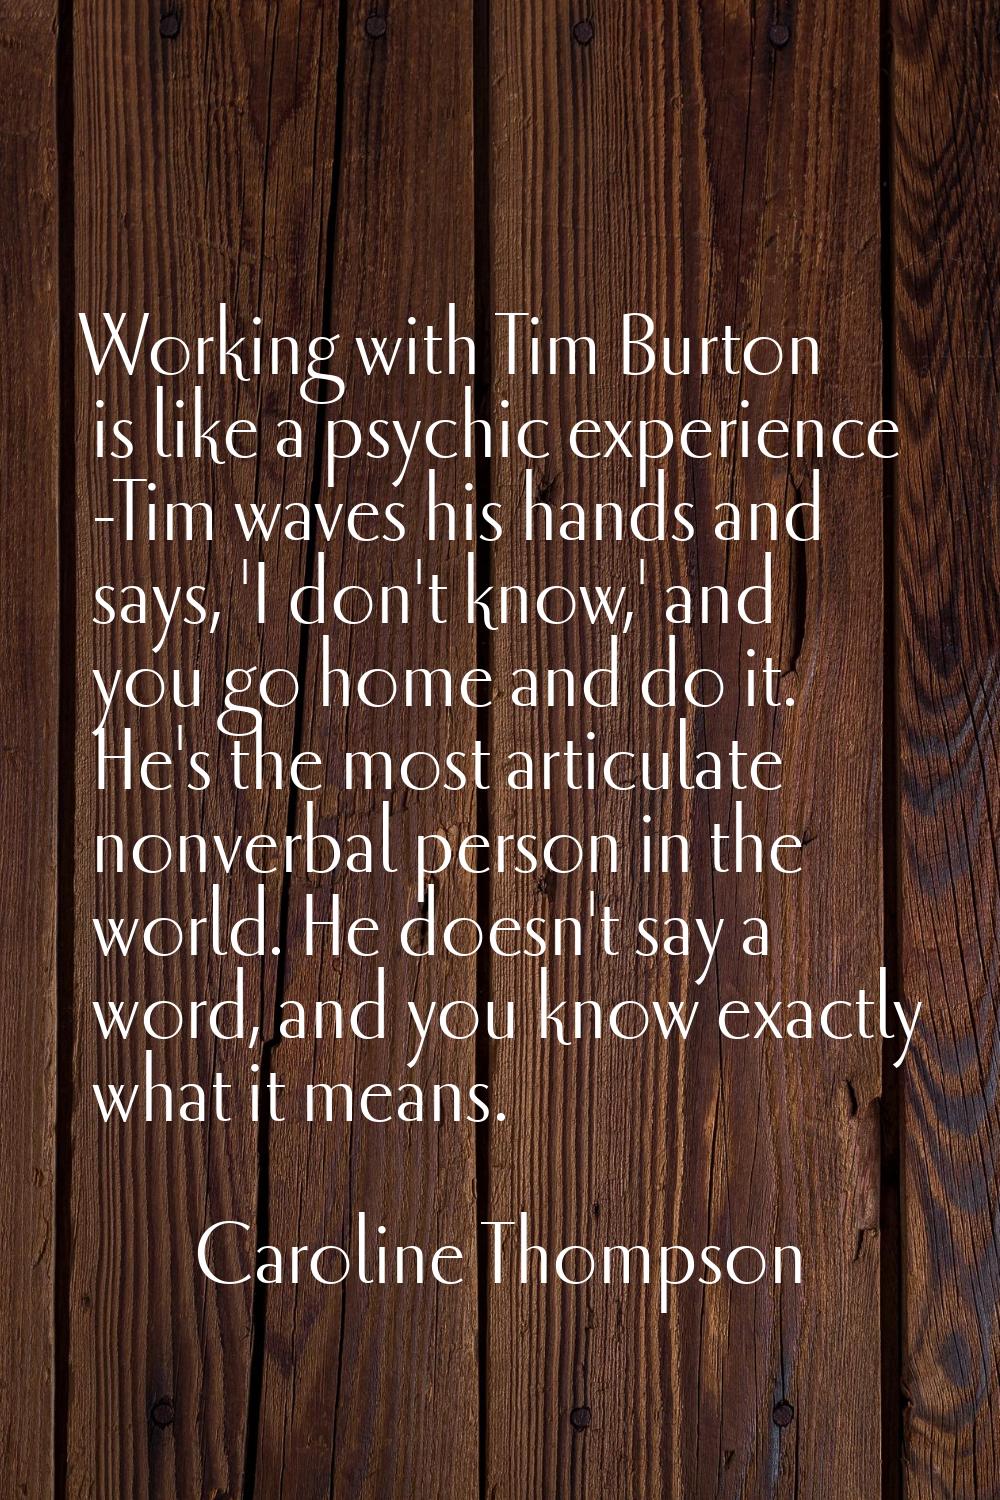 Working with Tim Burton is like a psychic experience -Tim waves his hands and says, 'I don't know,'